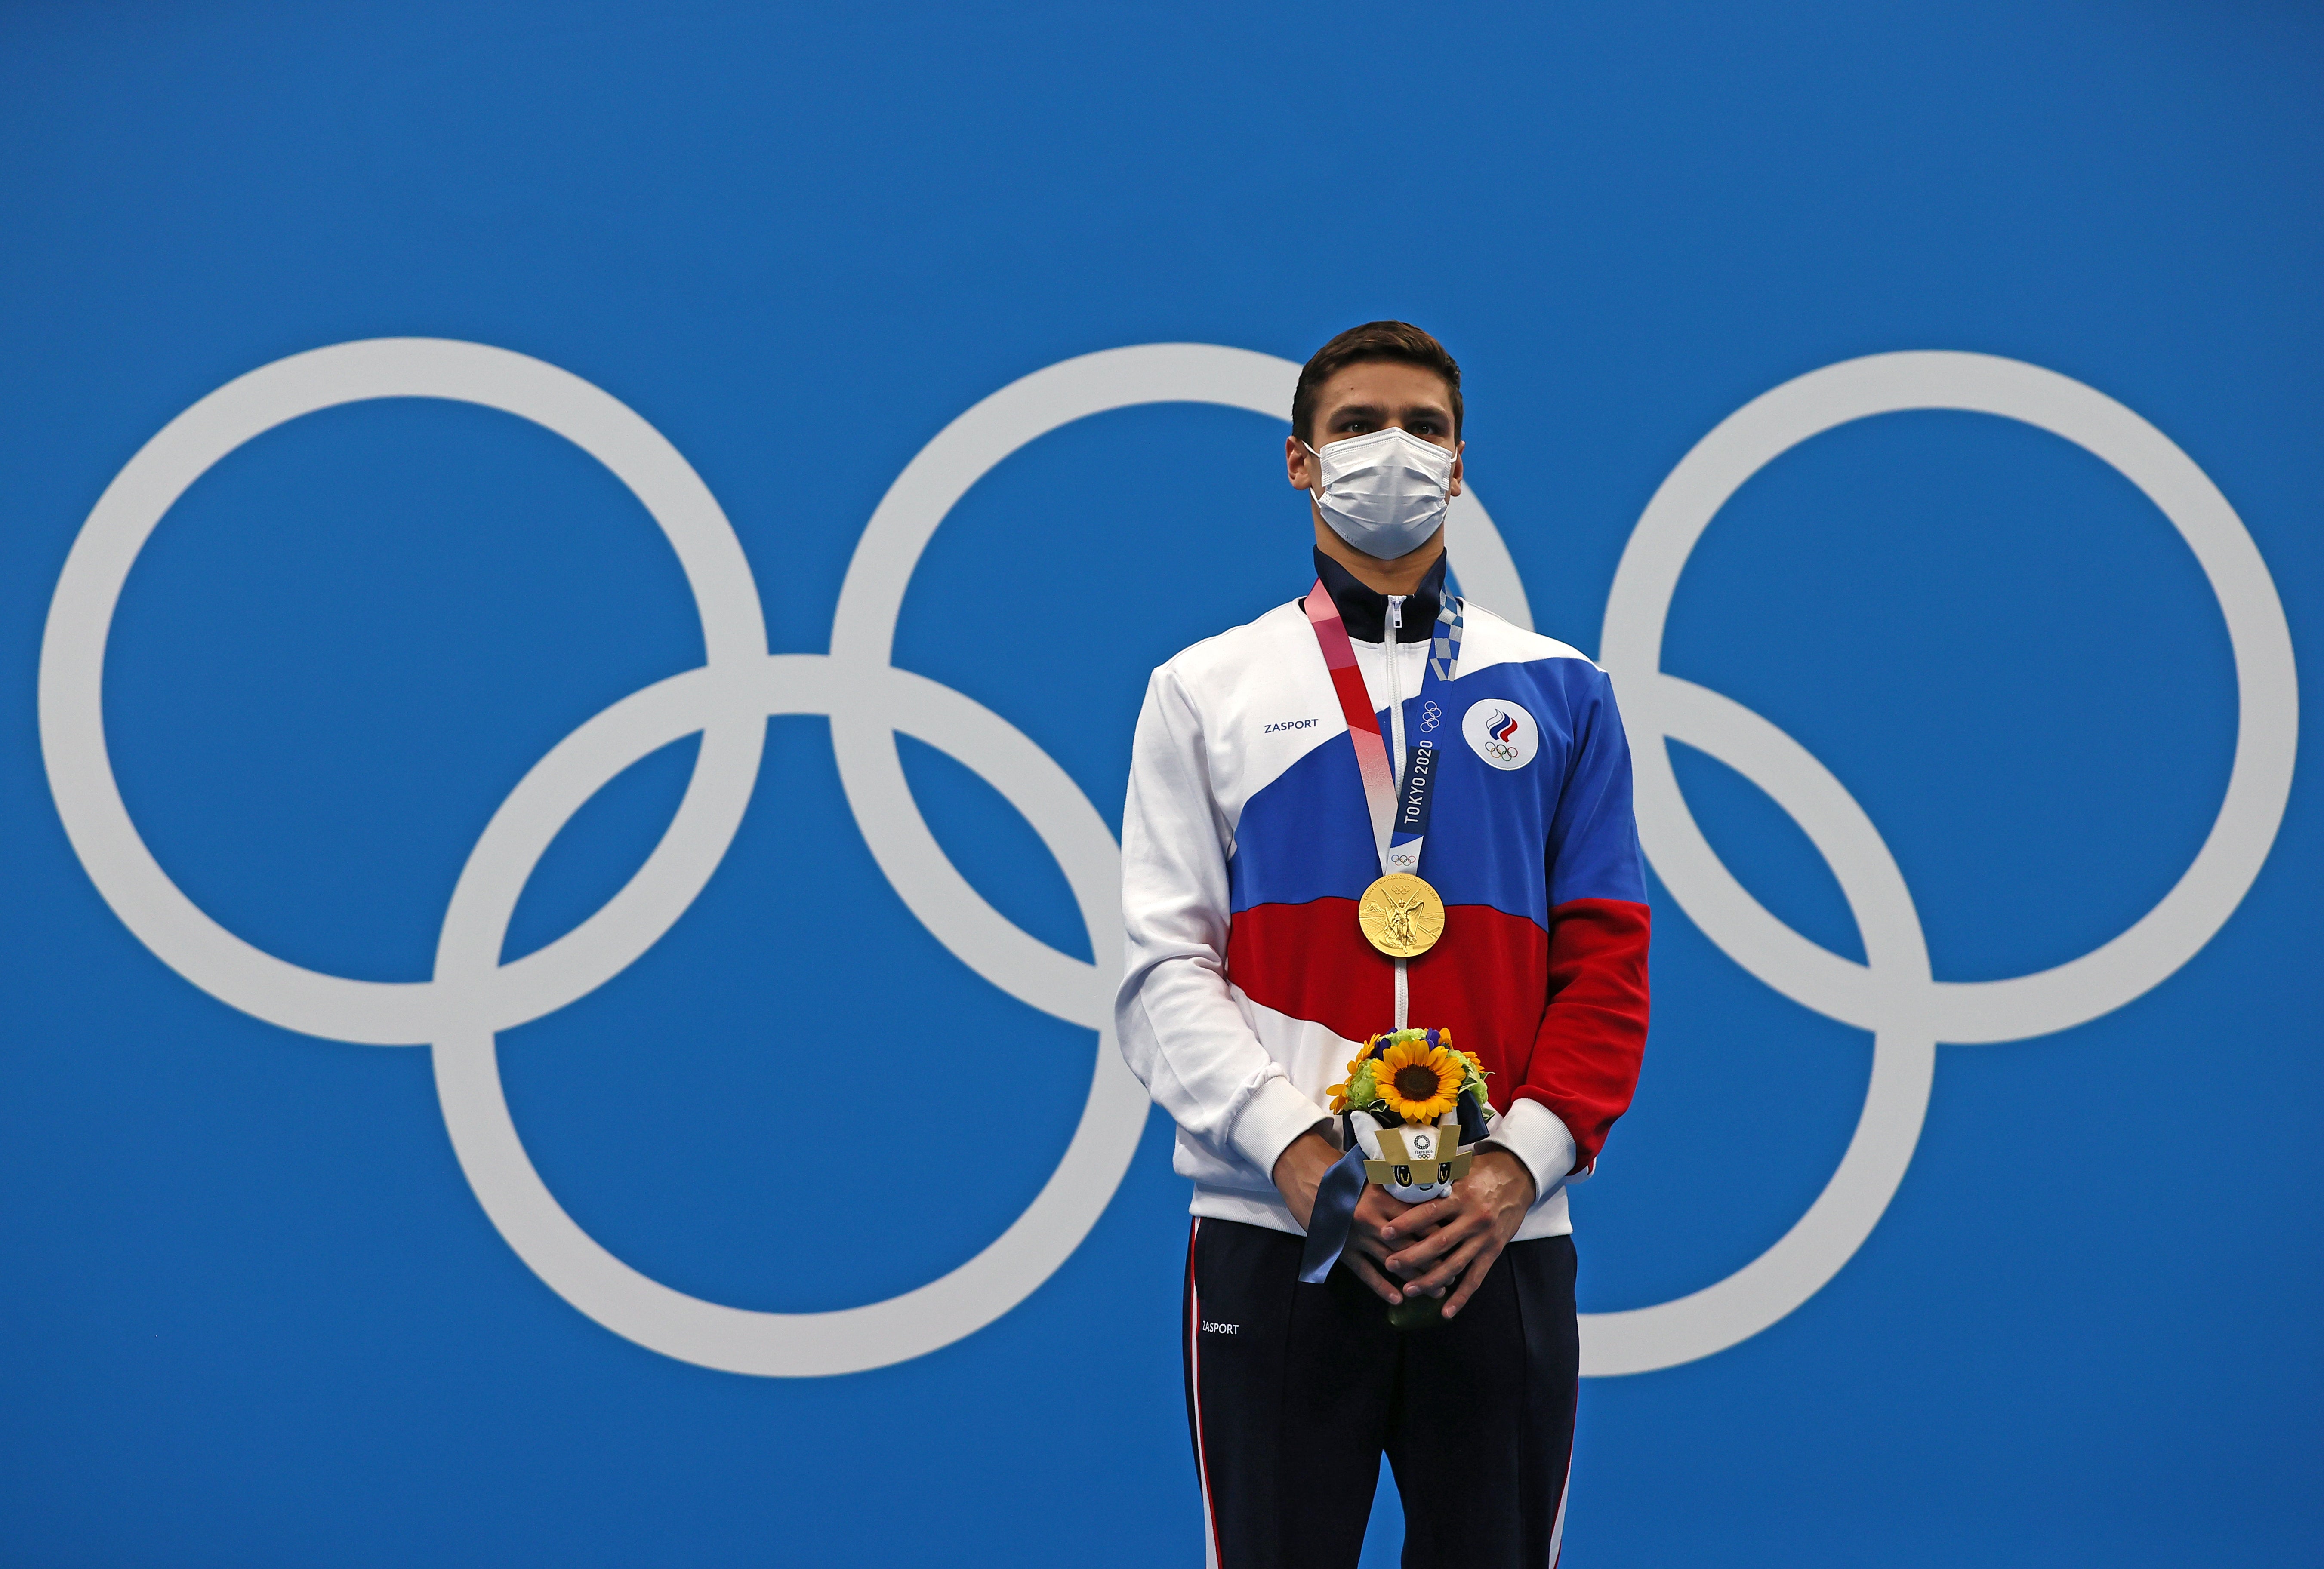 Evgeny Rylov won two gold medals at Tokyo 2020